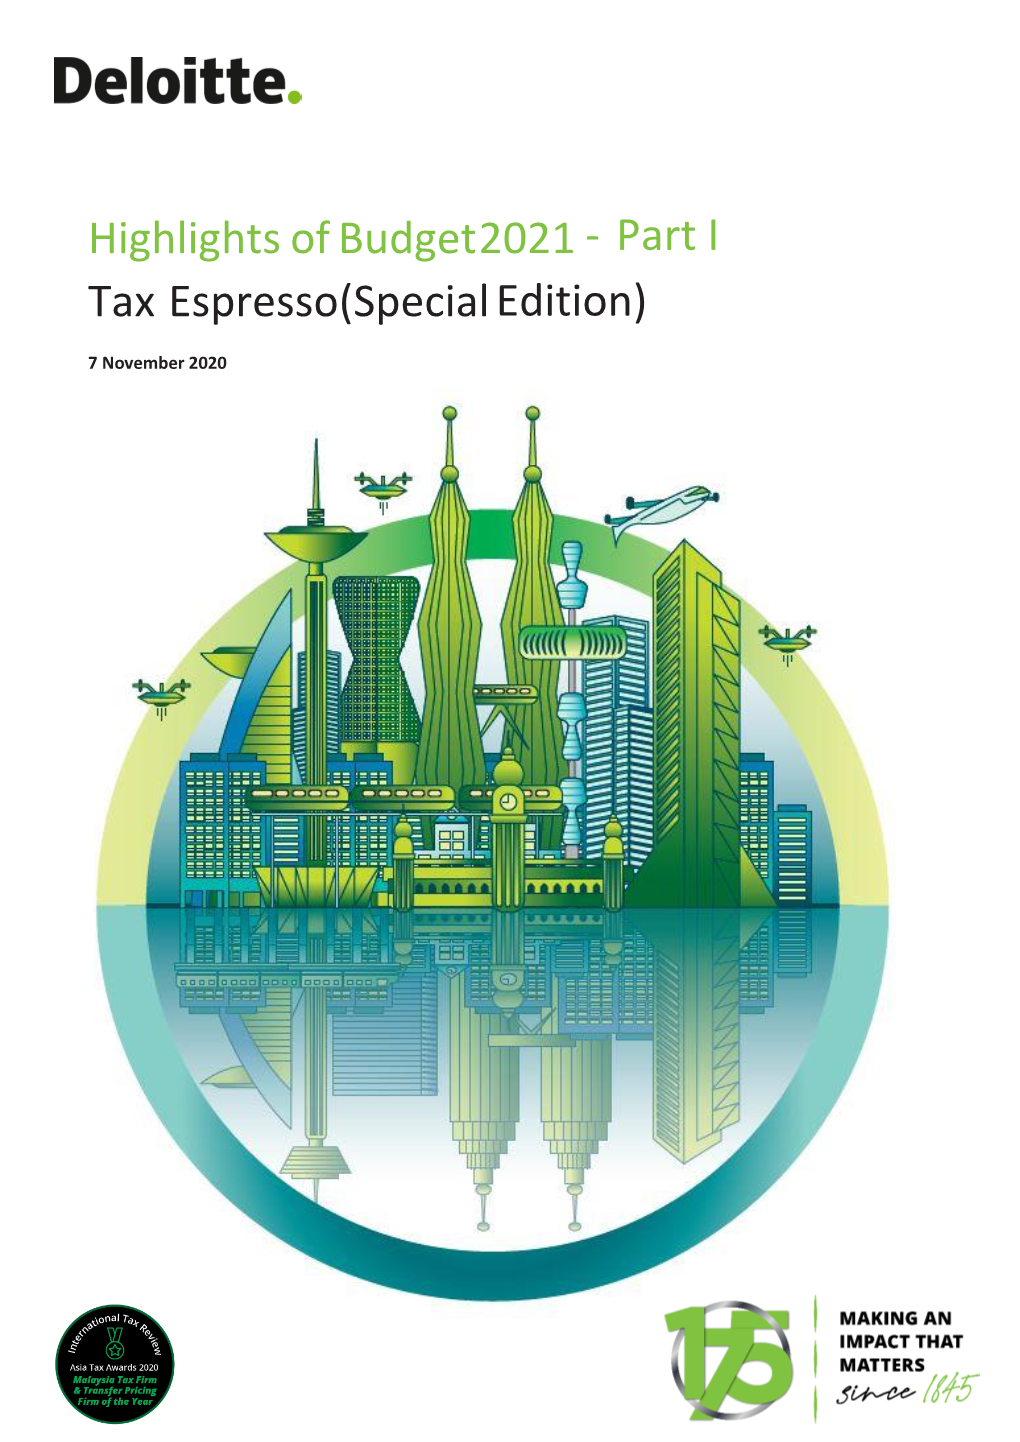 Highlights of Budget 2021 Tax Espresso (Specialedition)